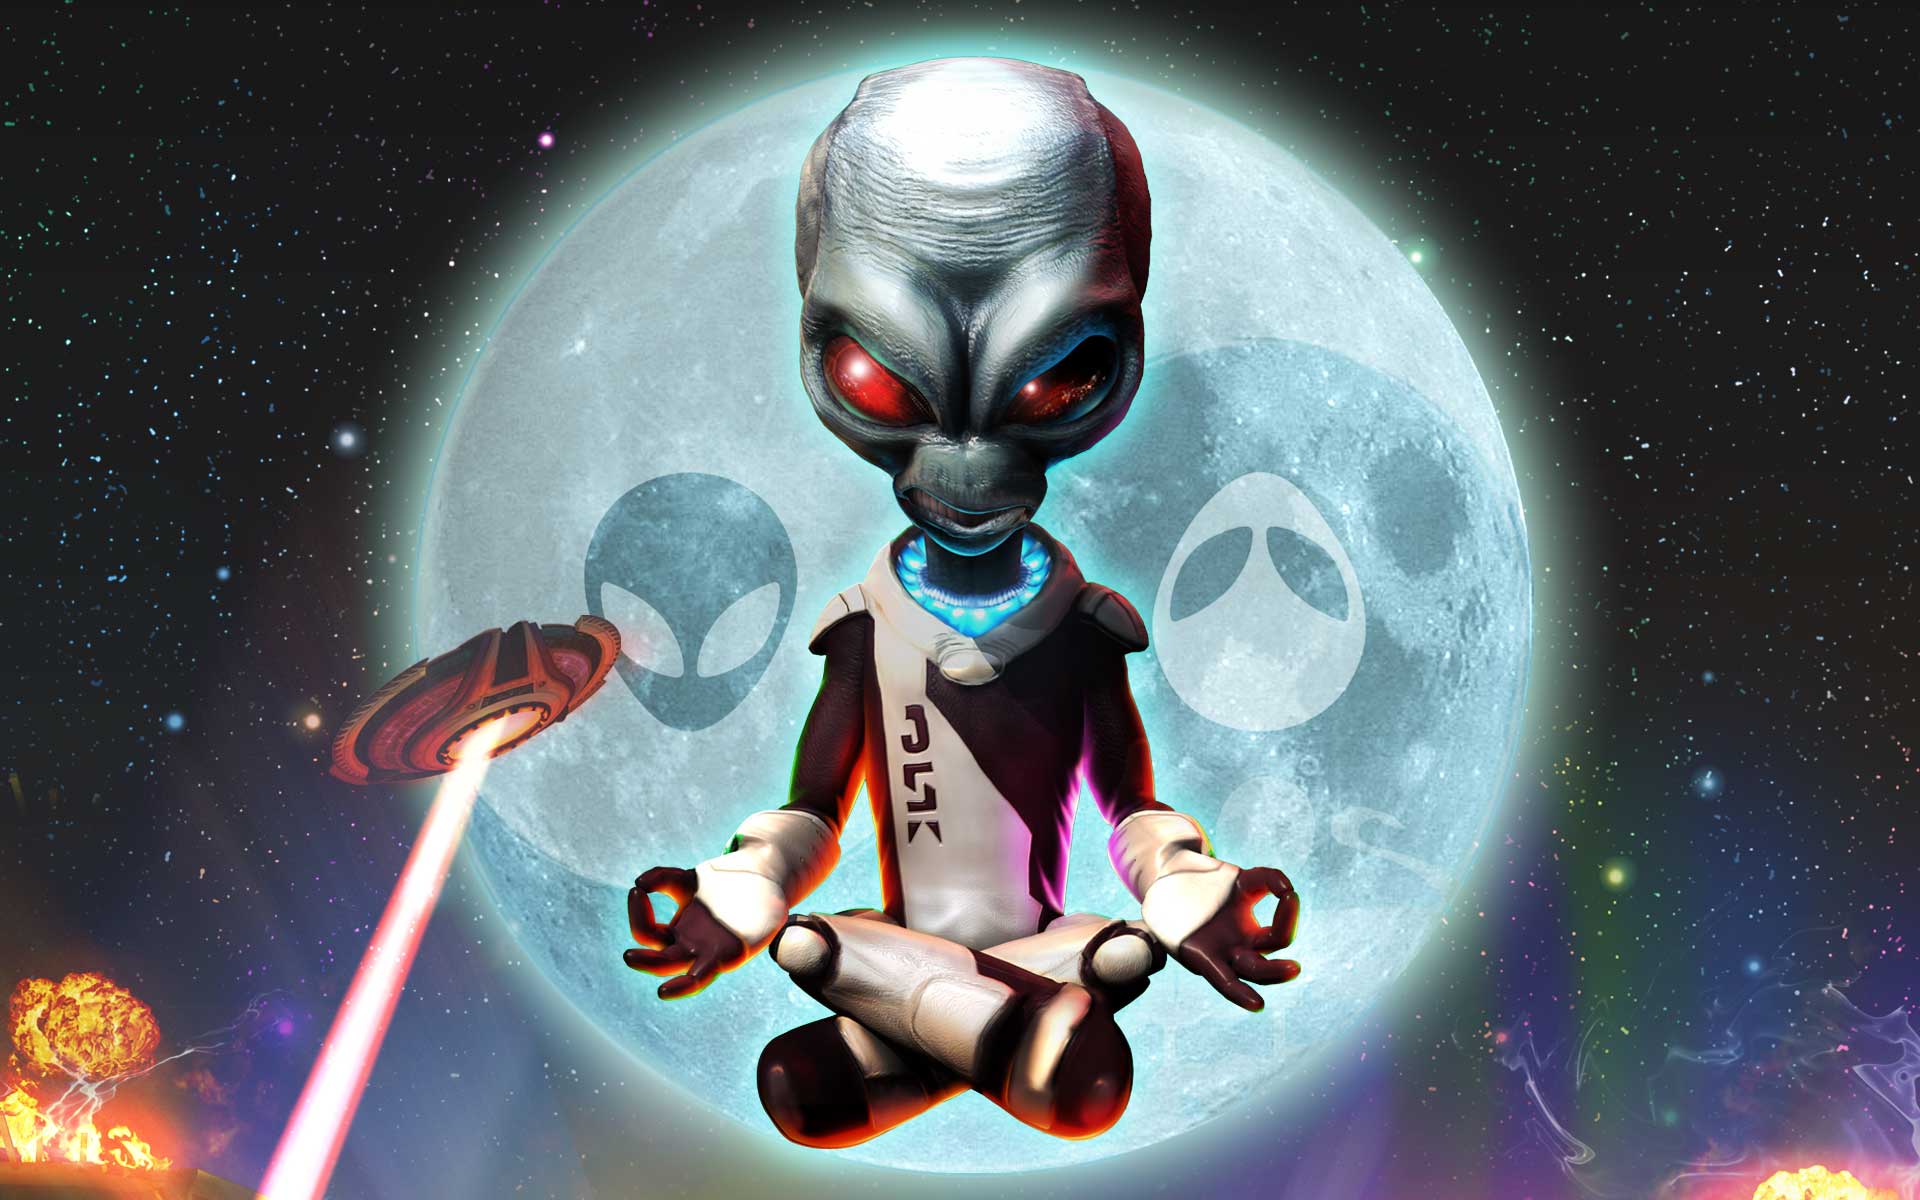 destroy all humans who voices crypto